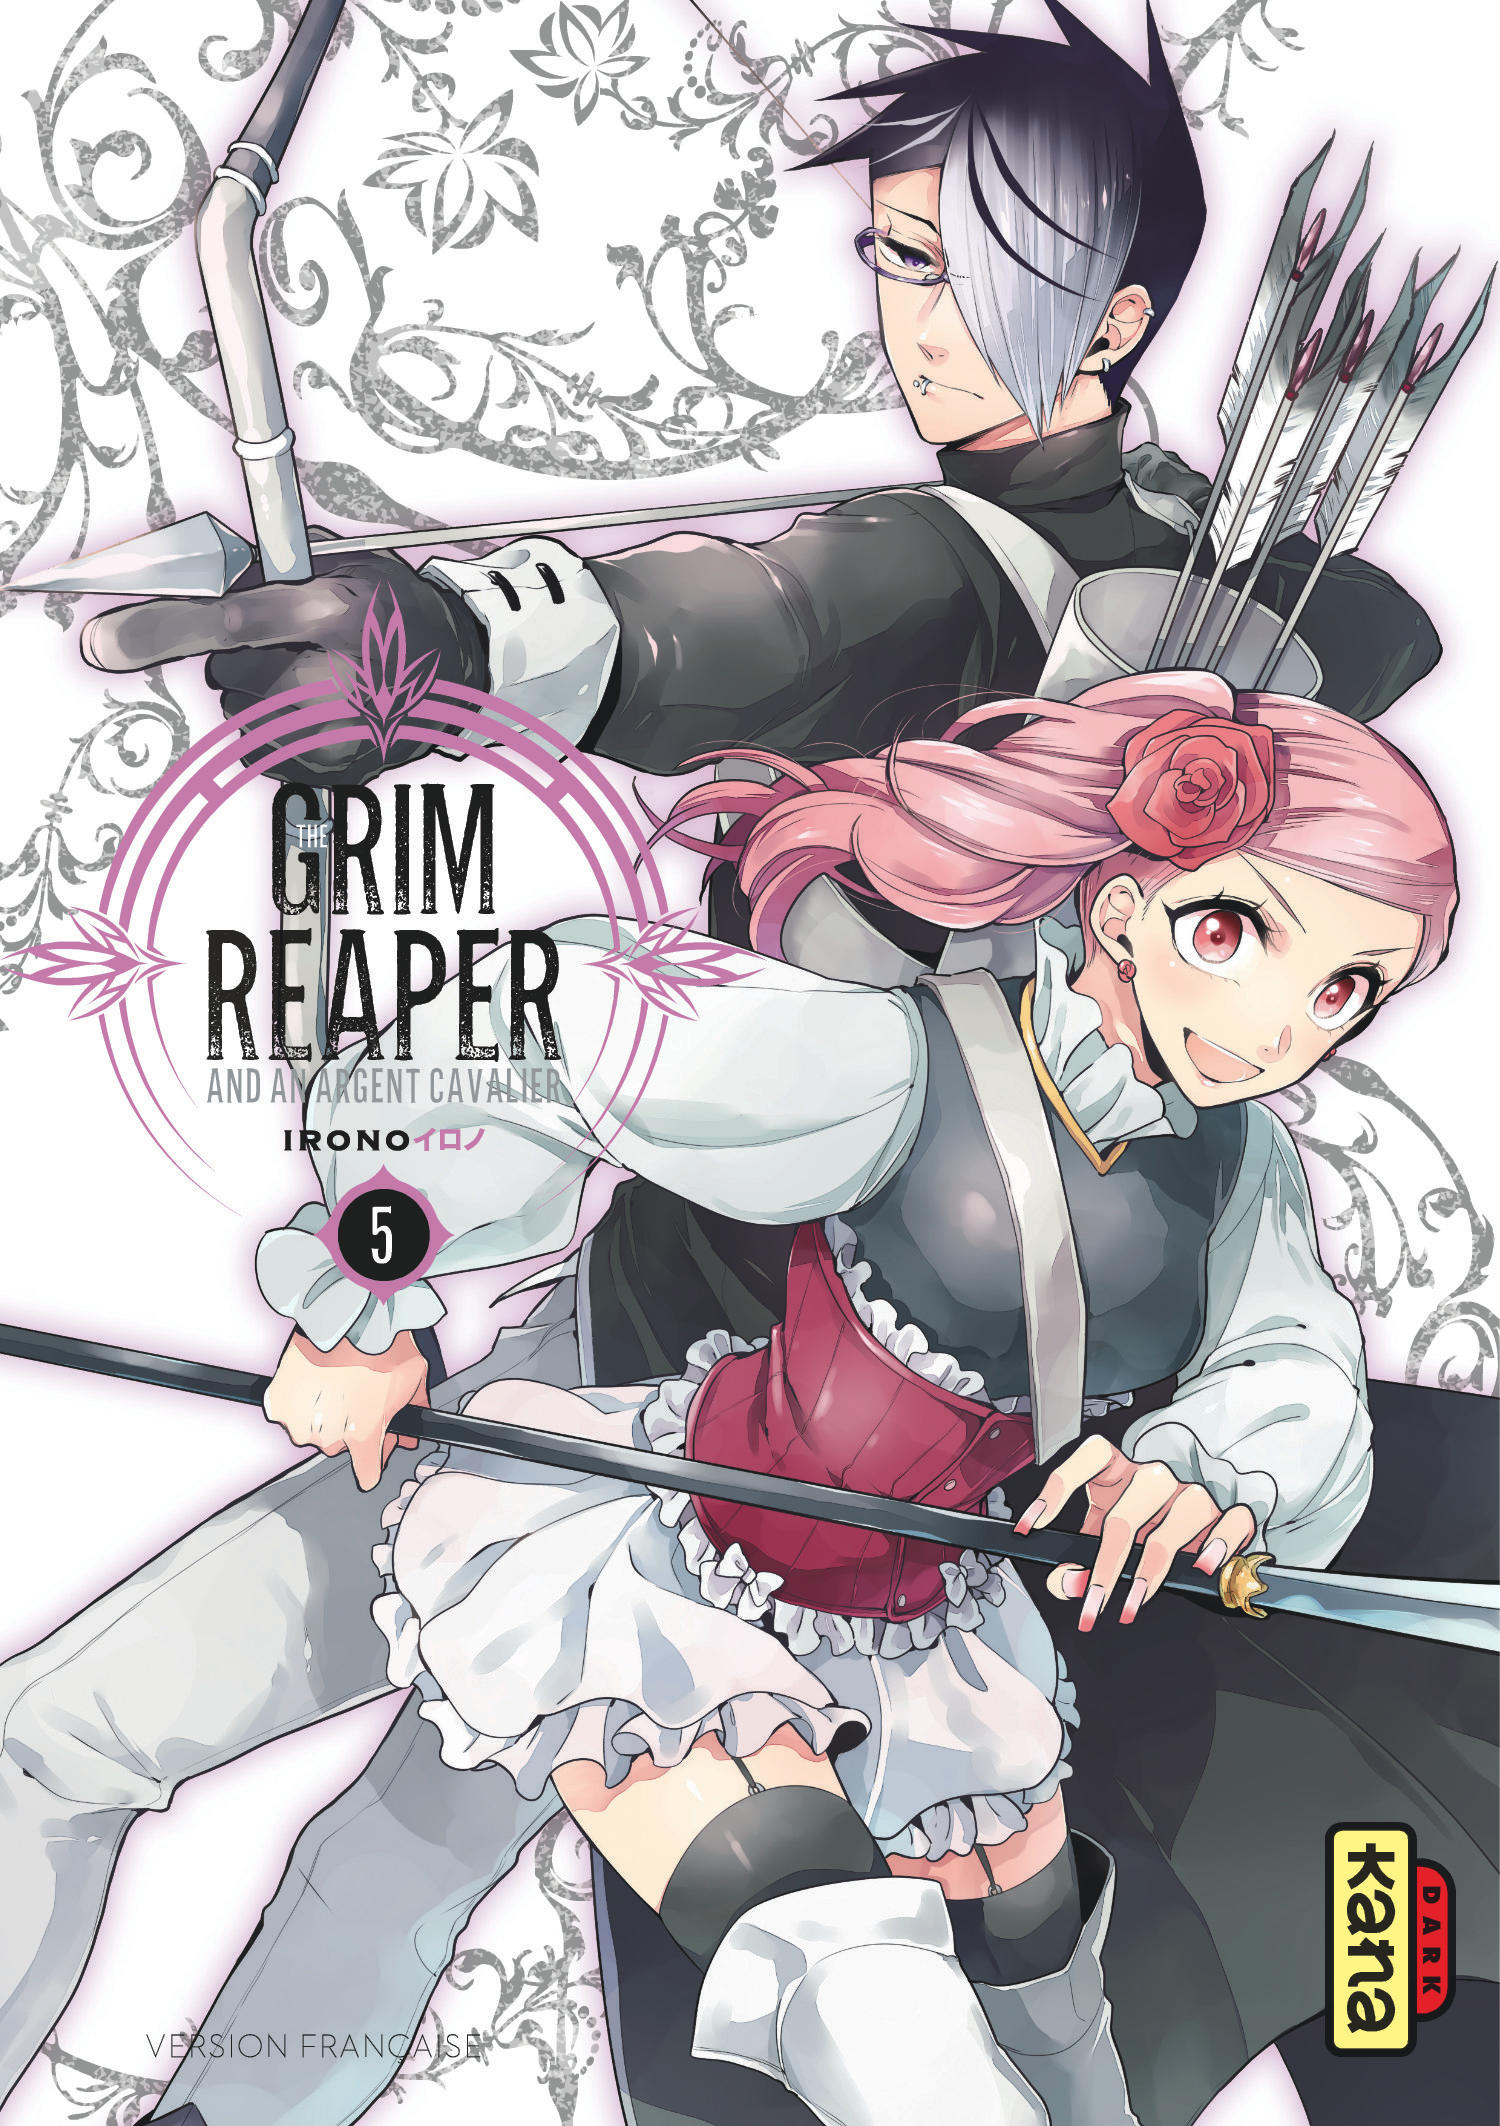 The grim reaper and an argent cavalier – Tome 5 - couv